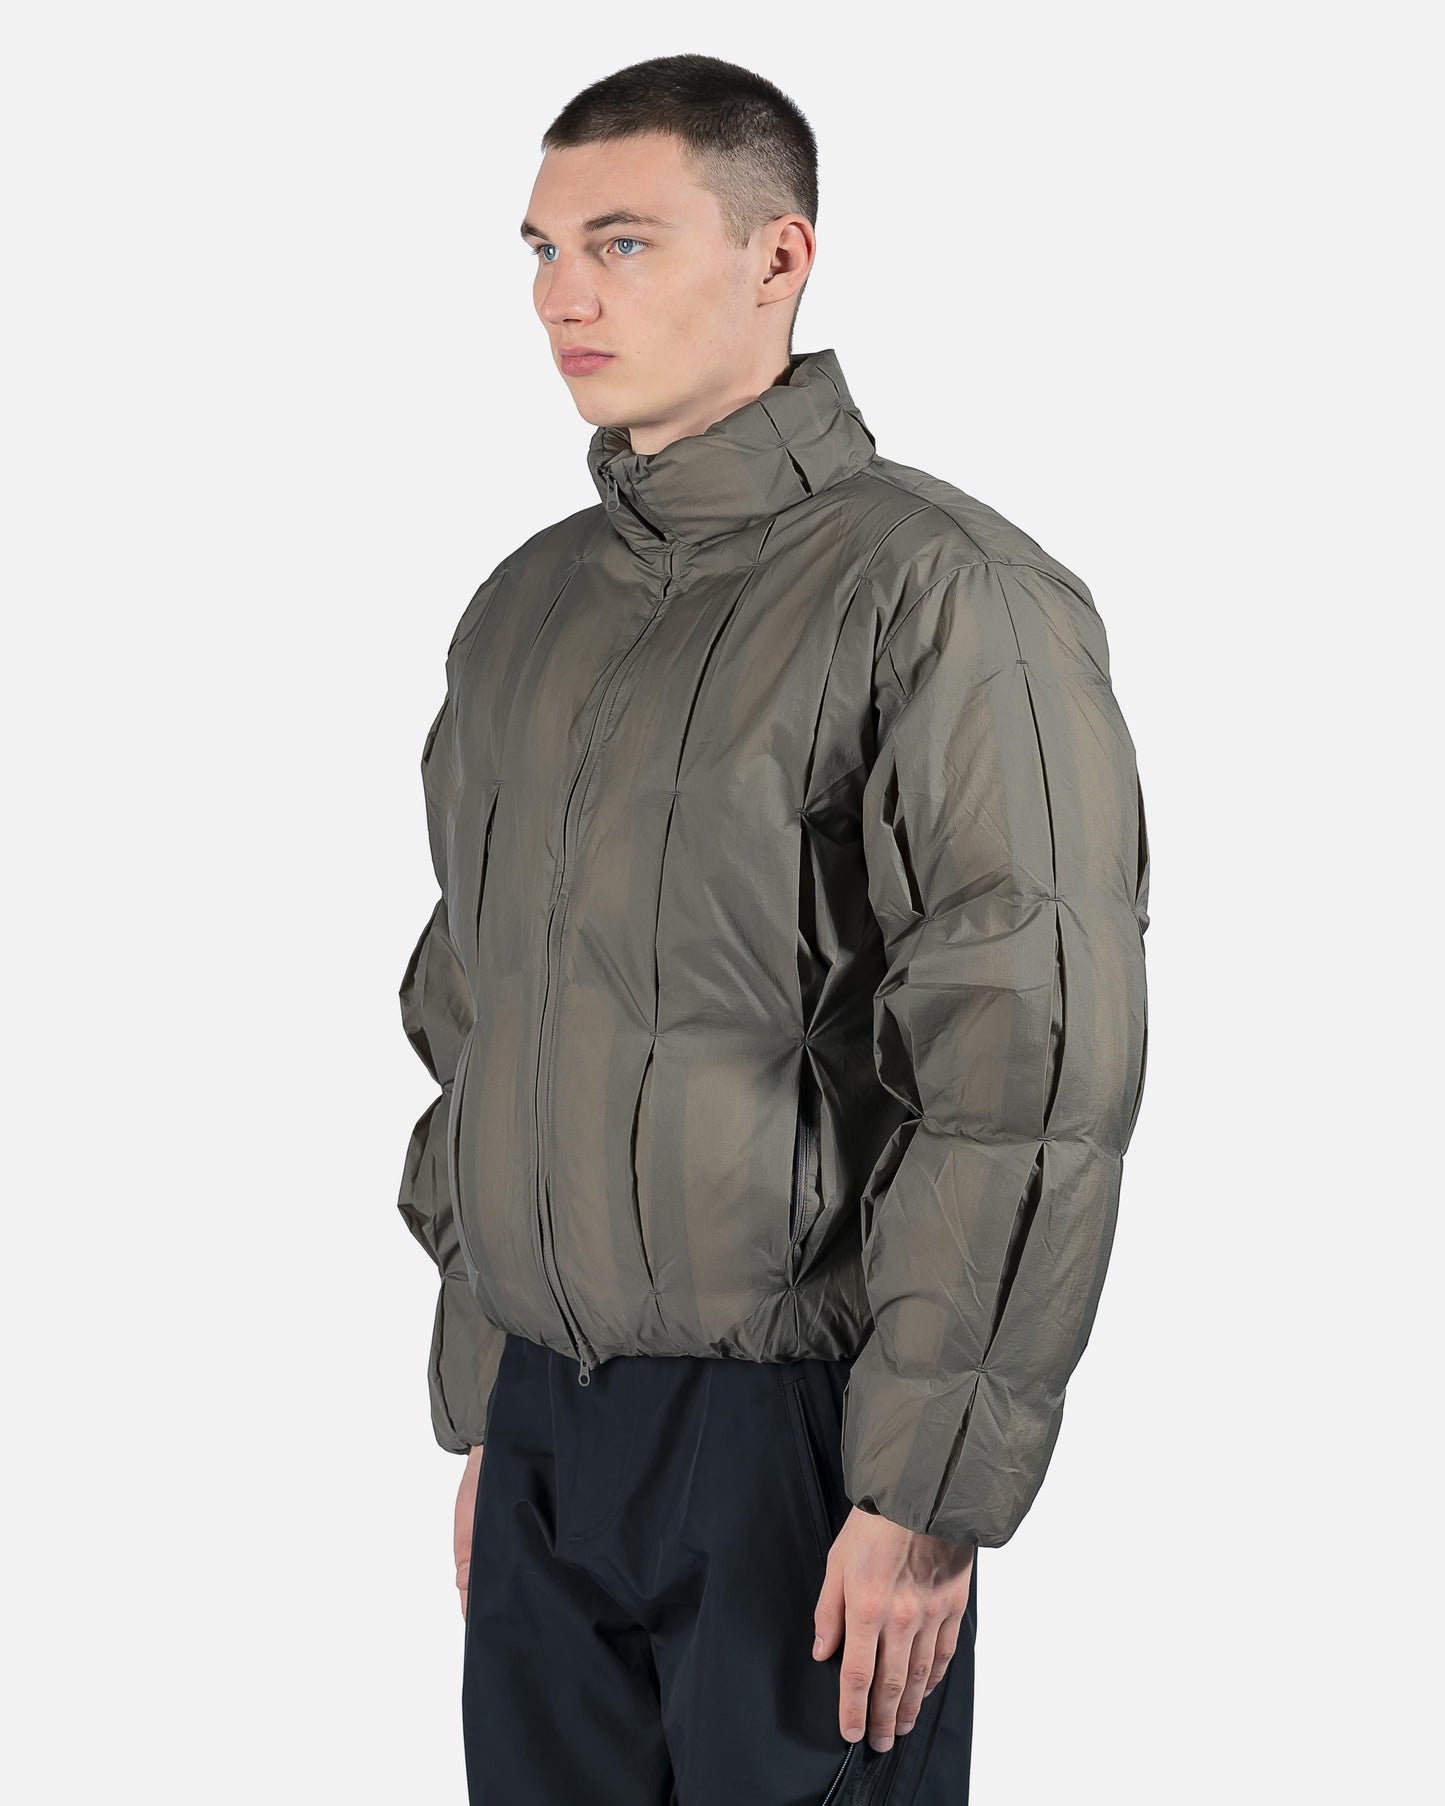 POST ARCHIVE FACTION (P.A.F) Men's Jackets 4.0+ Down Center Puffer Jacket in Charcoal